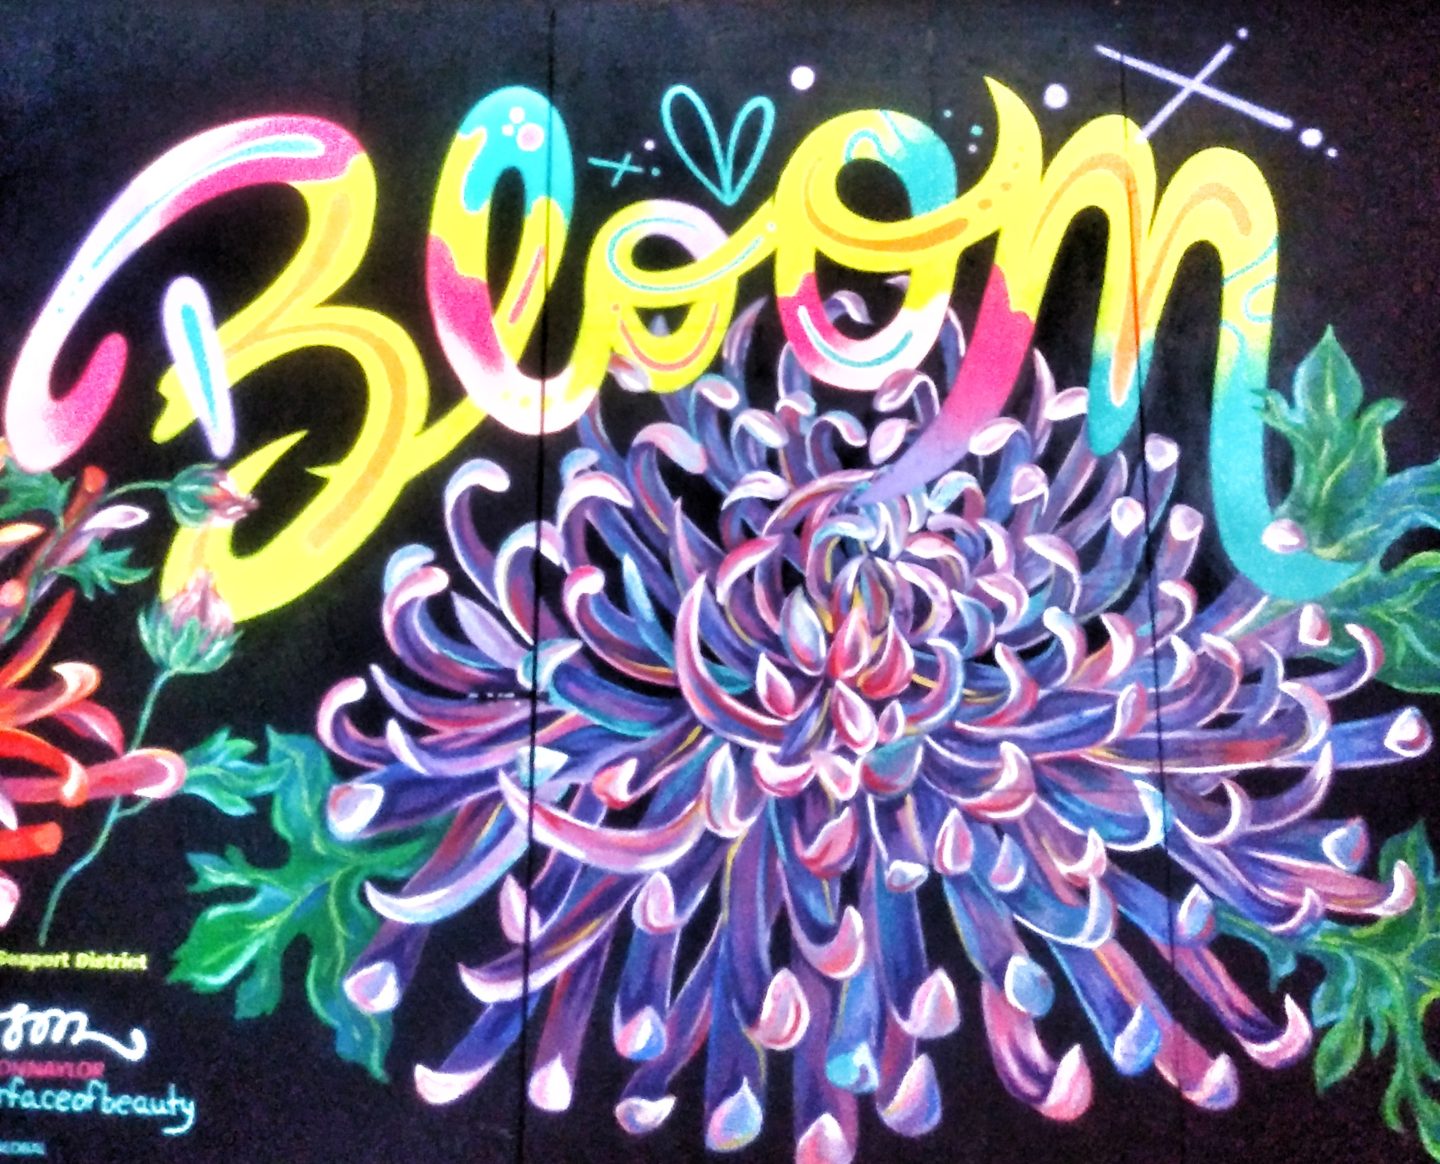 Bloom mural at Seaport District New York City